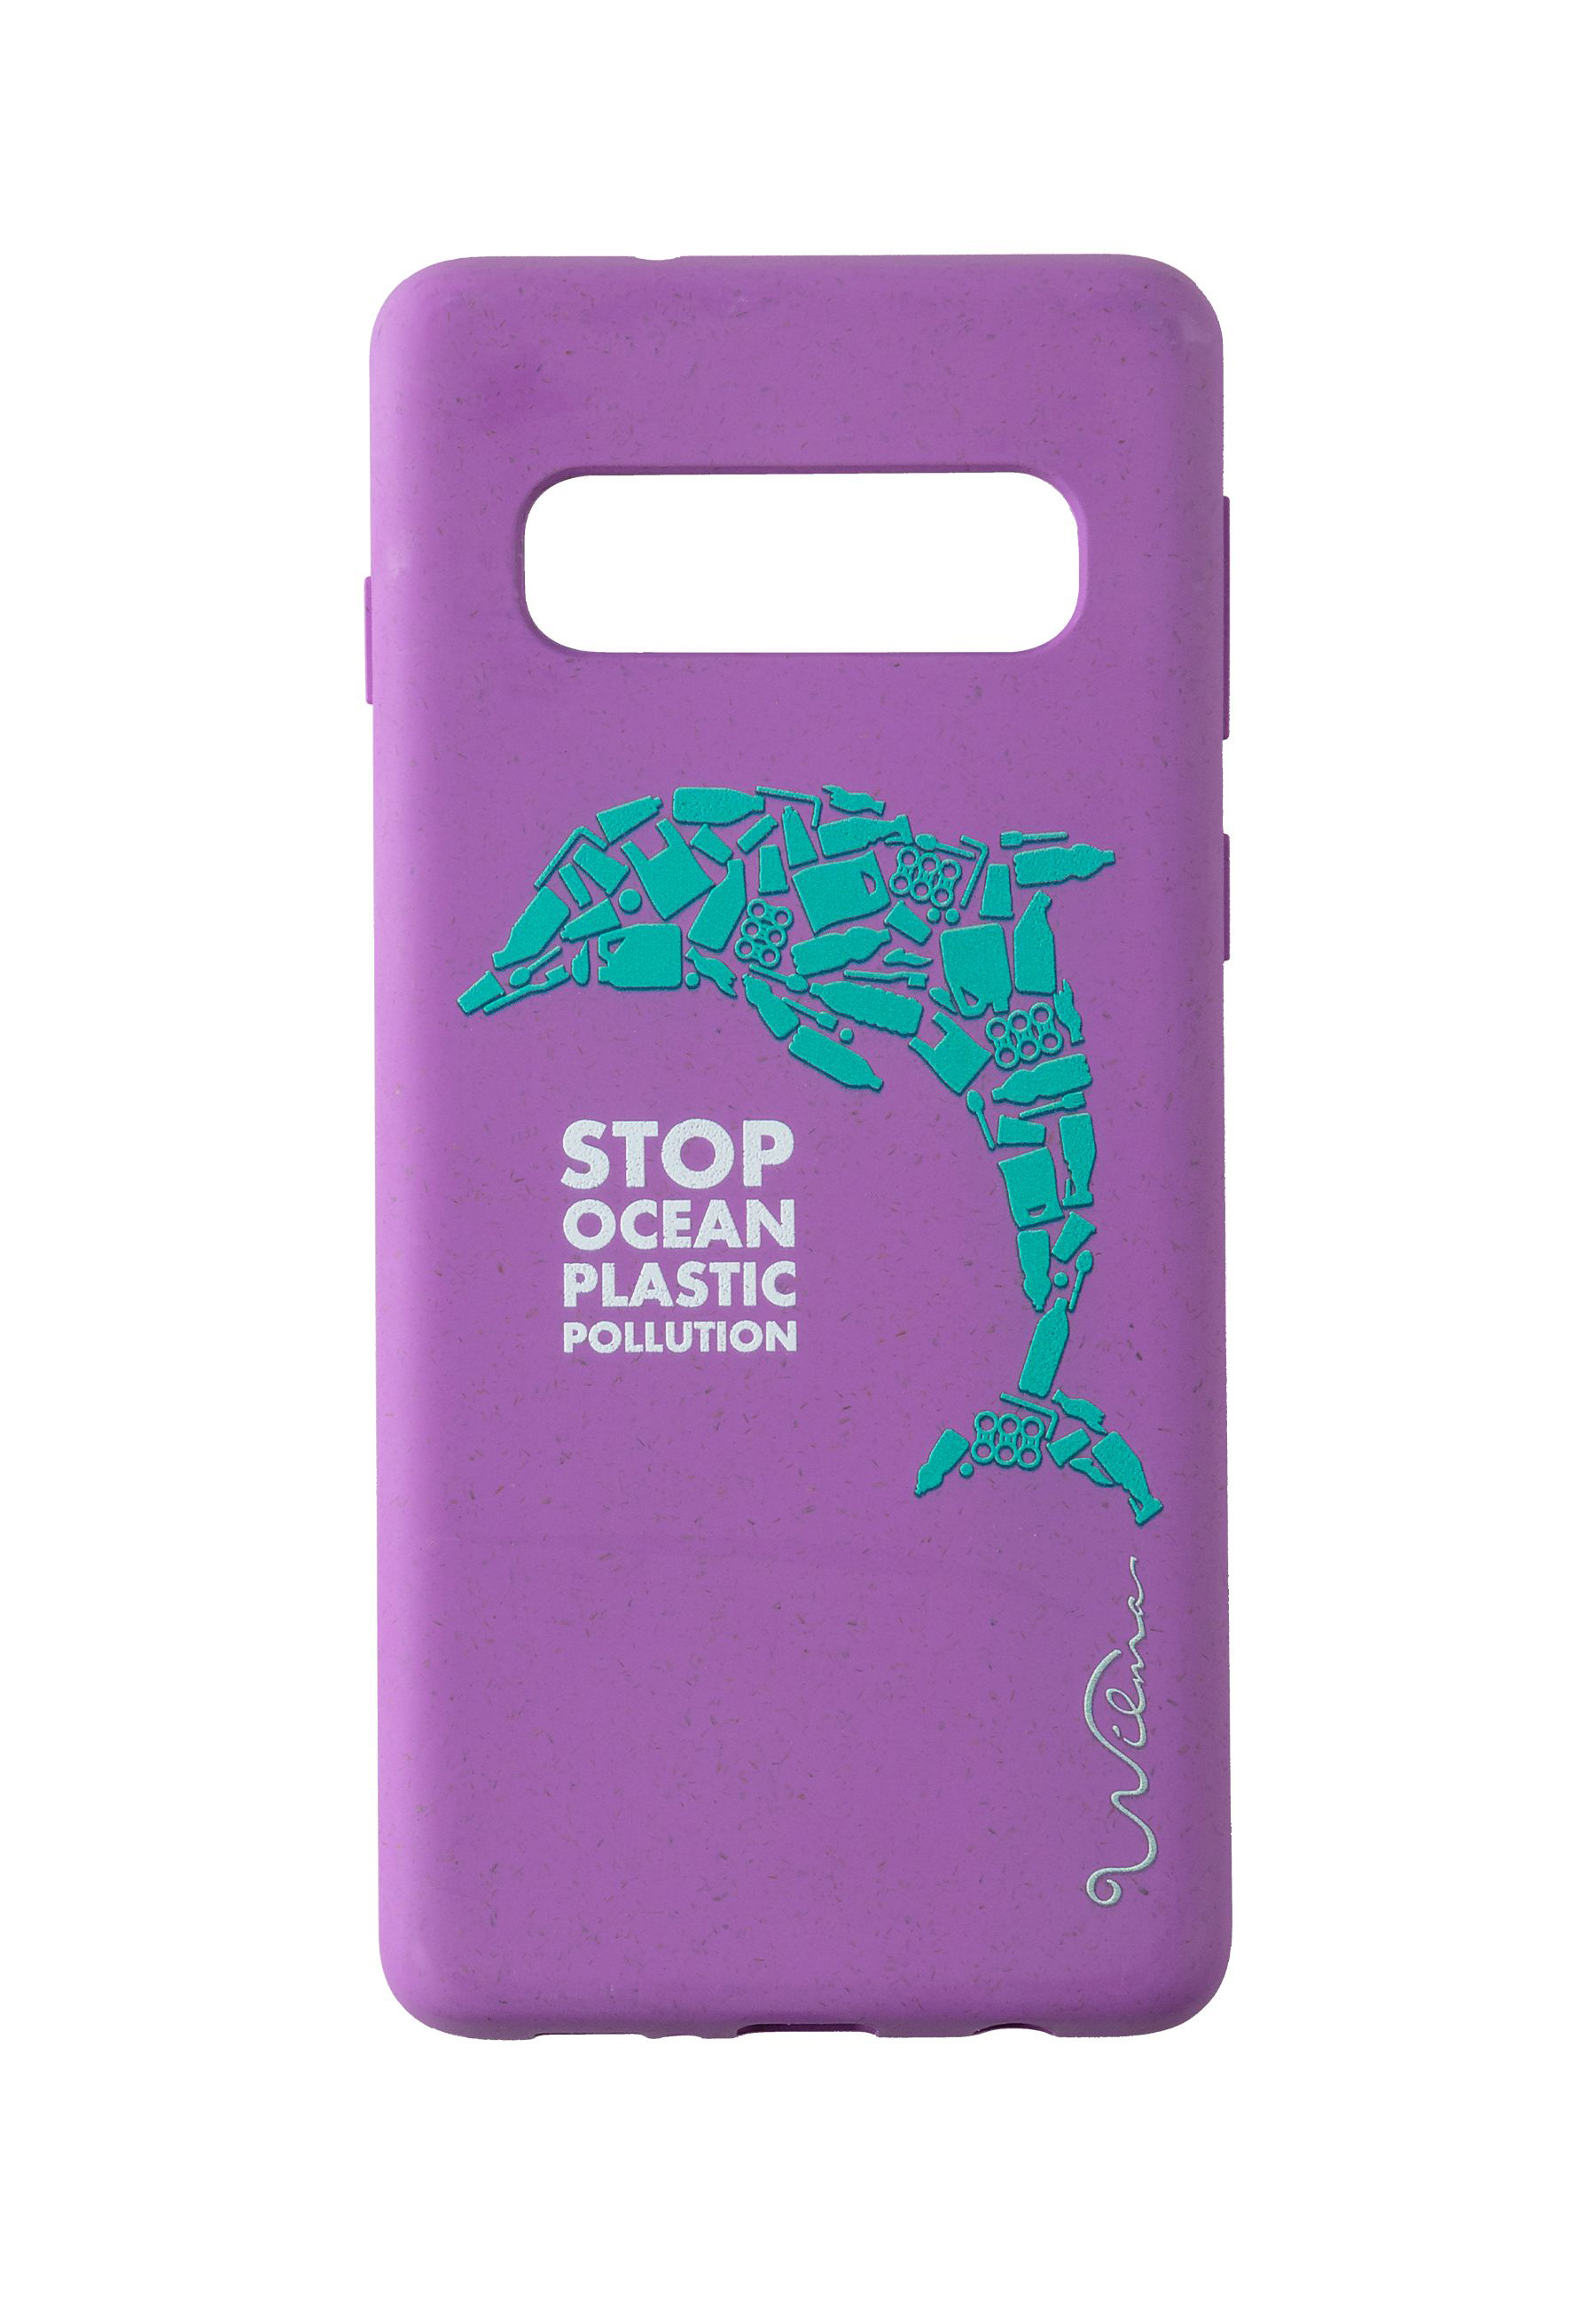 BY ECO Backcover, purple WILMA FASHION Samsung, Galaxy ORS10, S10,